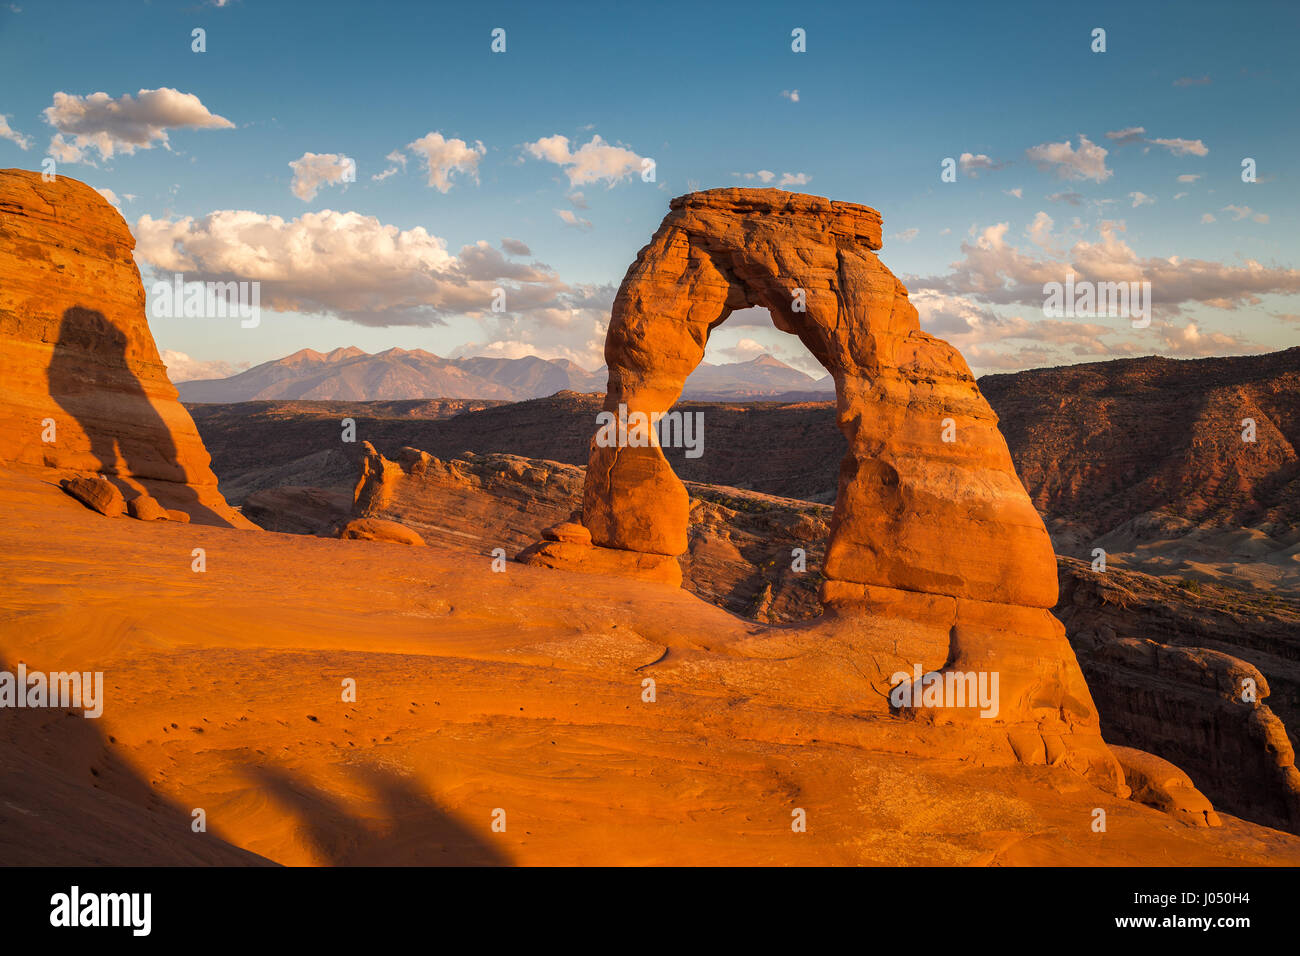 Classic postcard view of famous Delicate Arch, symbol of Utah and a popular scenic tourist attraction, in beautiful golden evening light at sunset Stock Photo